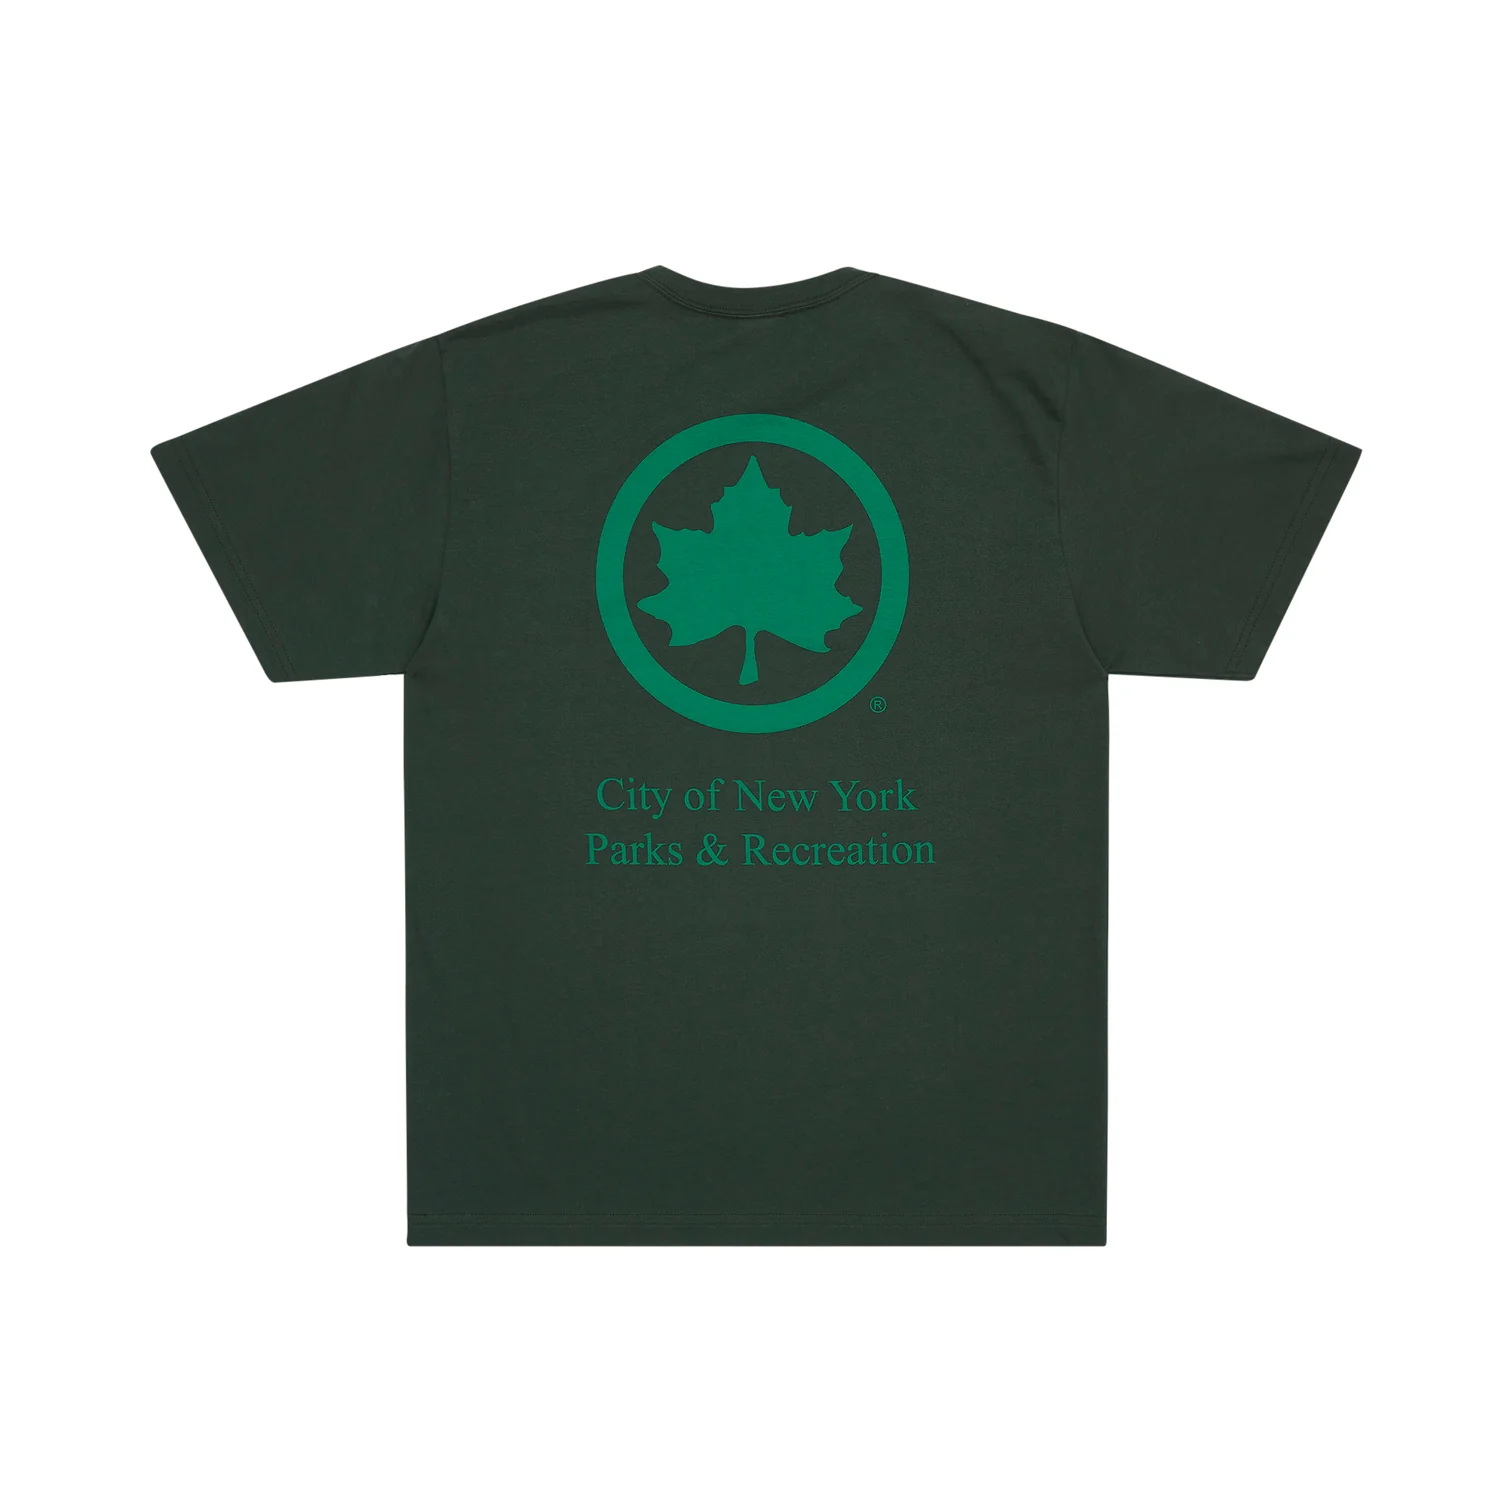 An image of a t-shirt with a maple leaf and the text “City of New York Parks & Recreation”